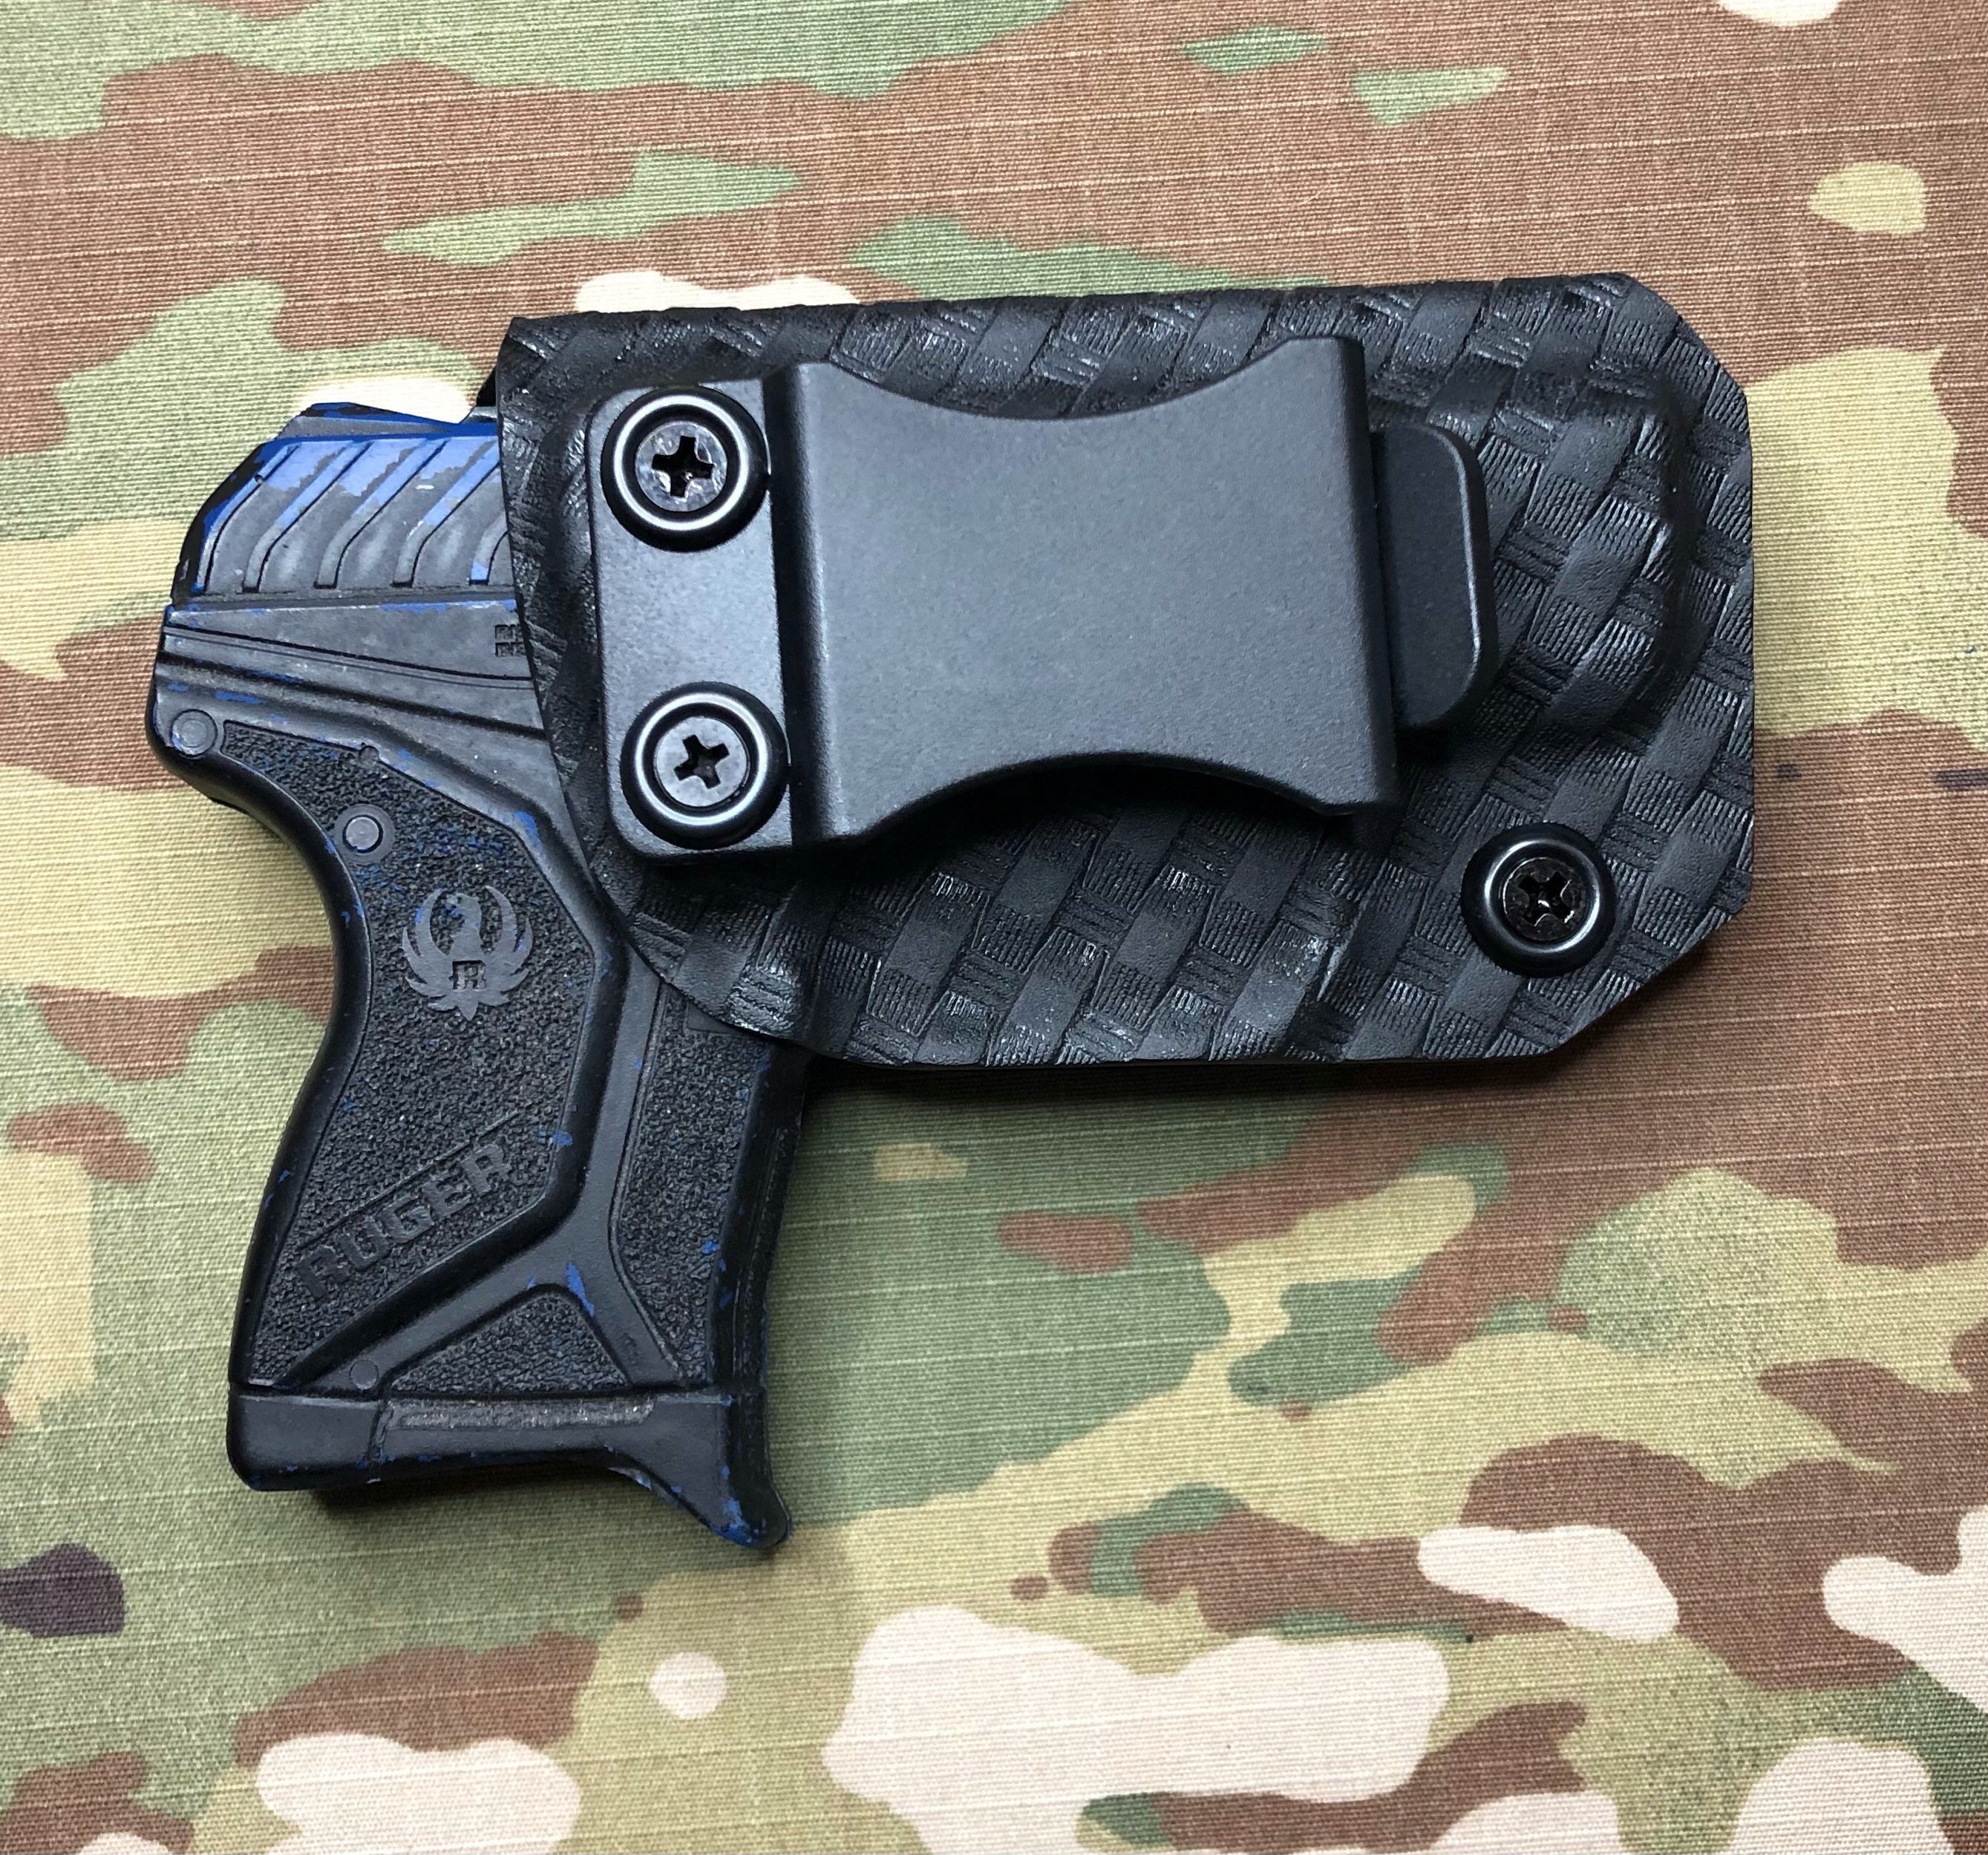 Ruger LCP 2 LCPII 380 Kydex Holster Carbon Fiber Blue Adjustable IWB Right Hand 